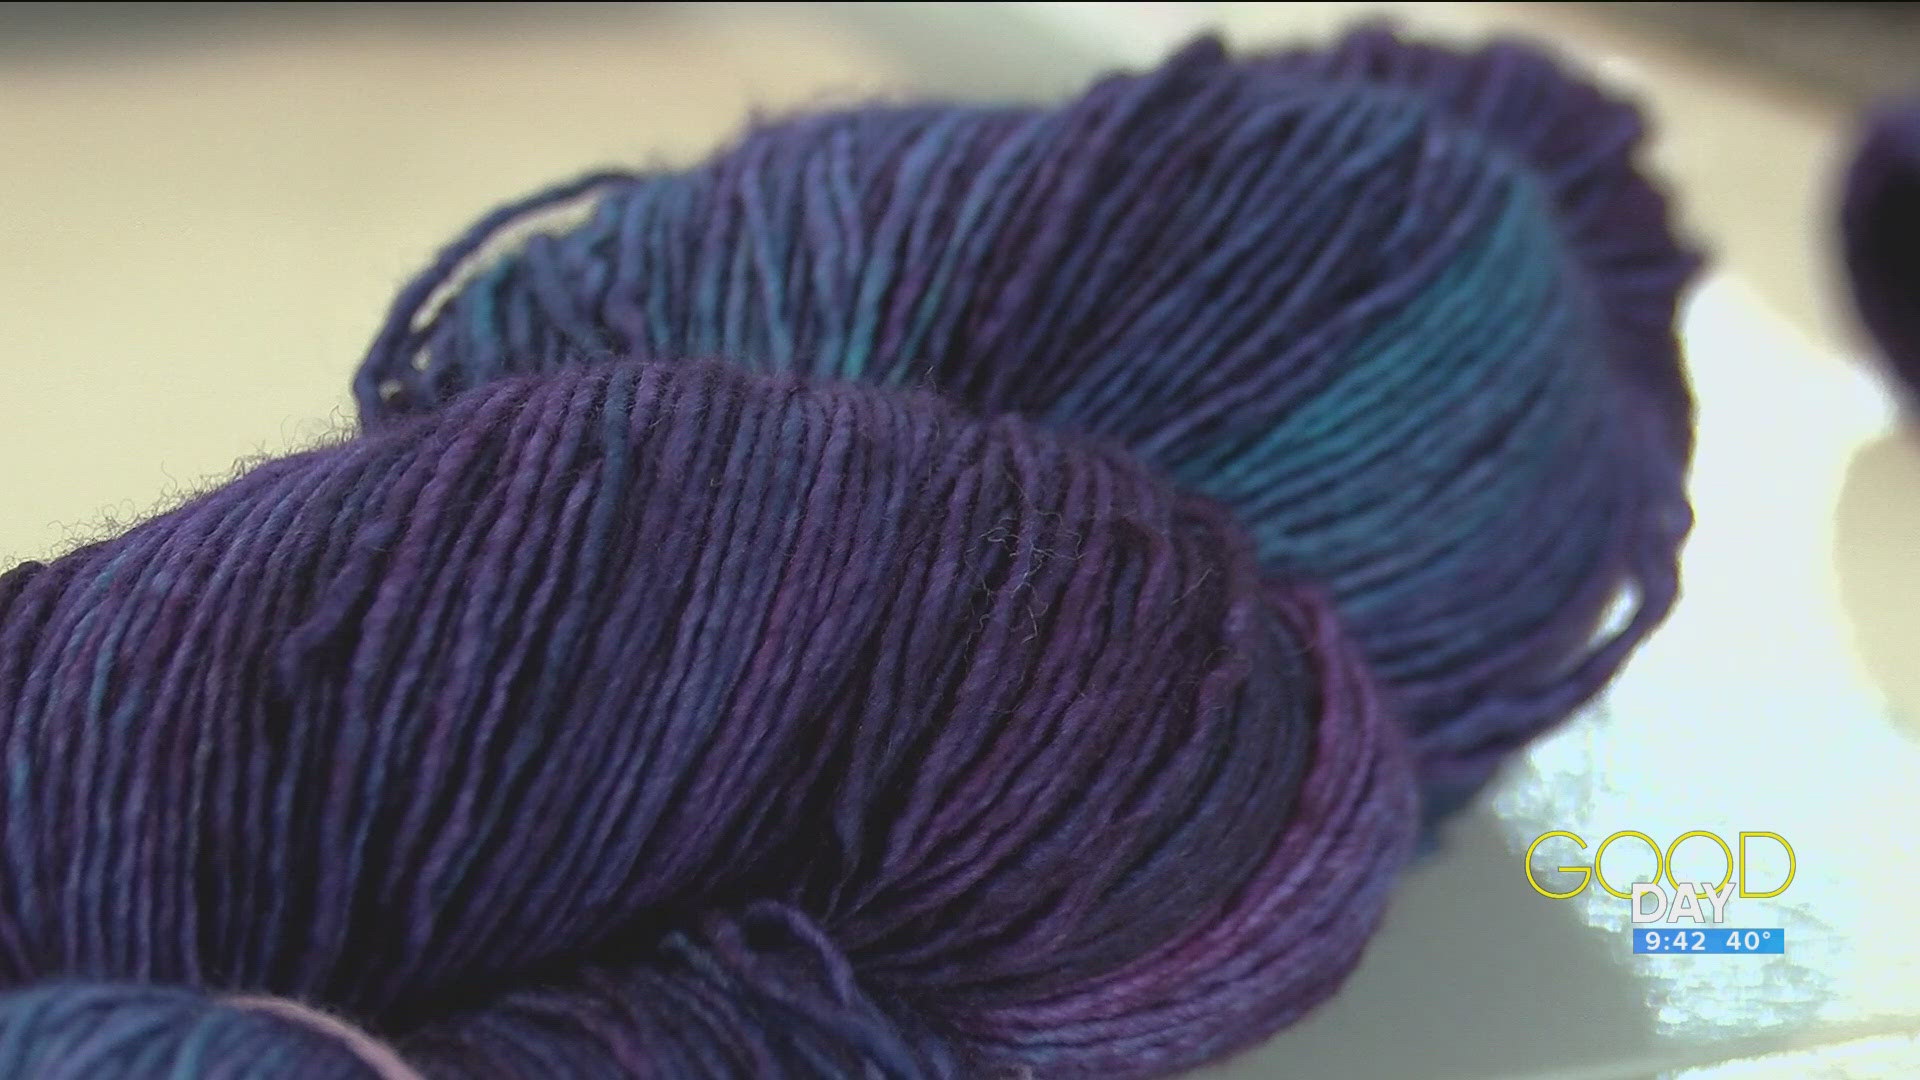 These local fiber businesses are celebrating local yarn store day! Plus, Christina Williamson and Taylor Brooks talk new knitting patterns and deals.